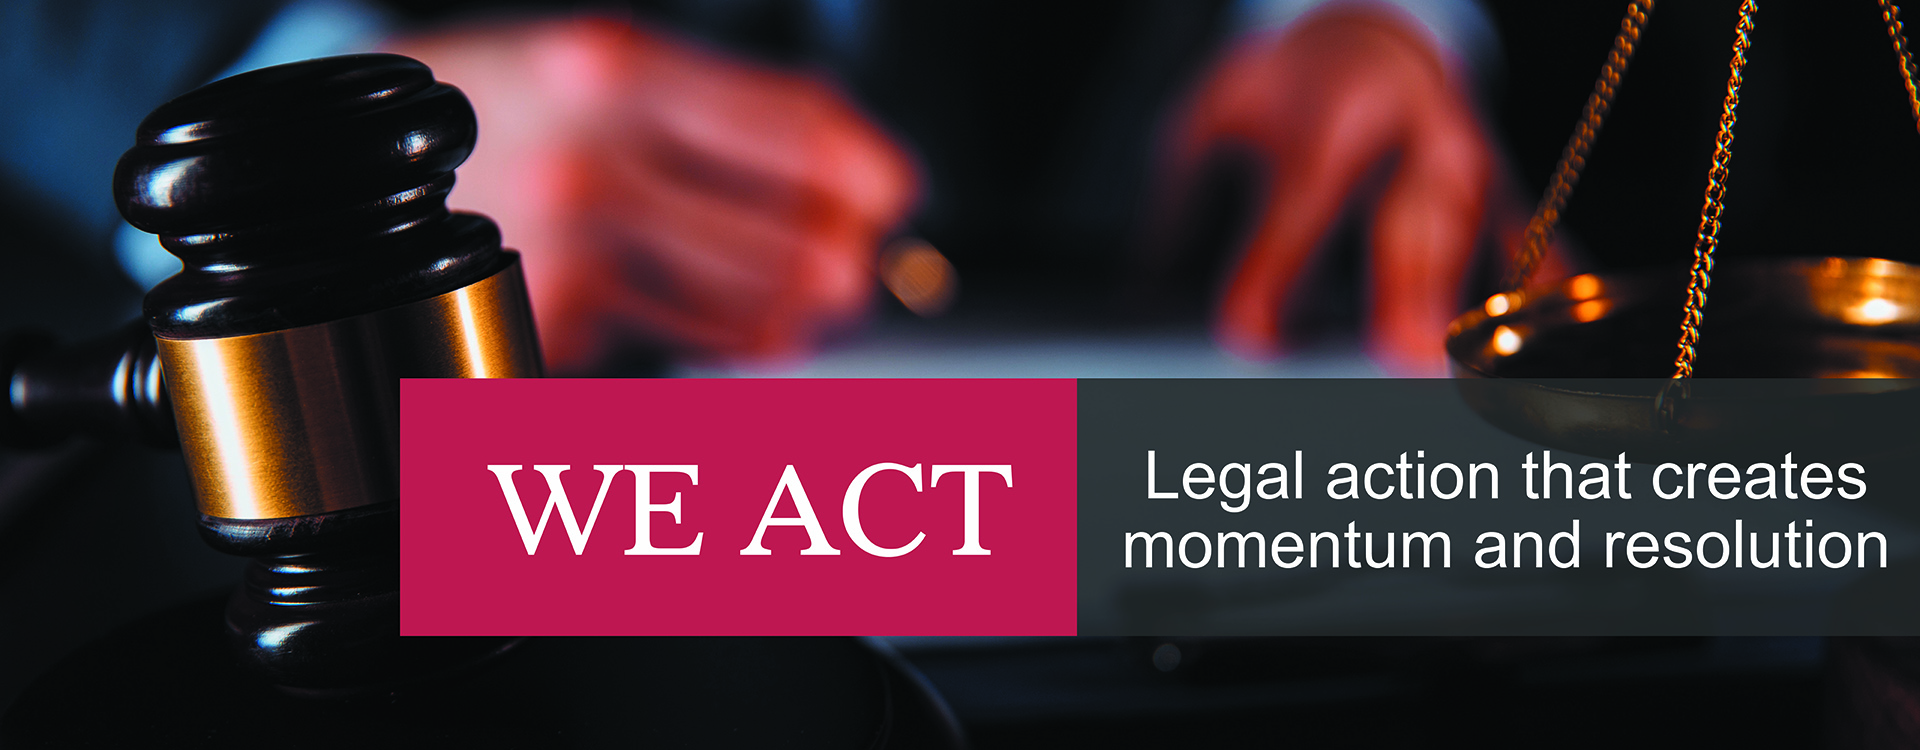 We act. Legal action that creates momentum and resolution.